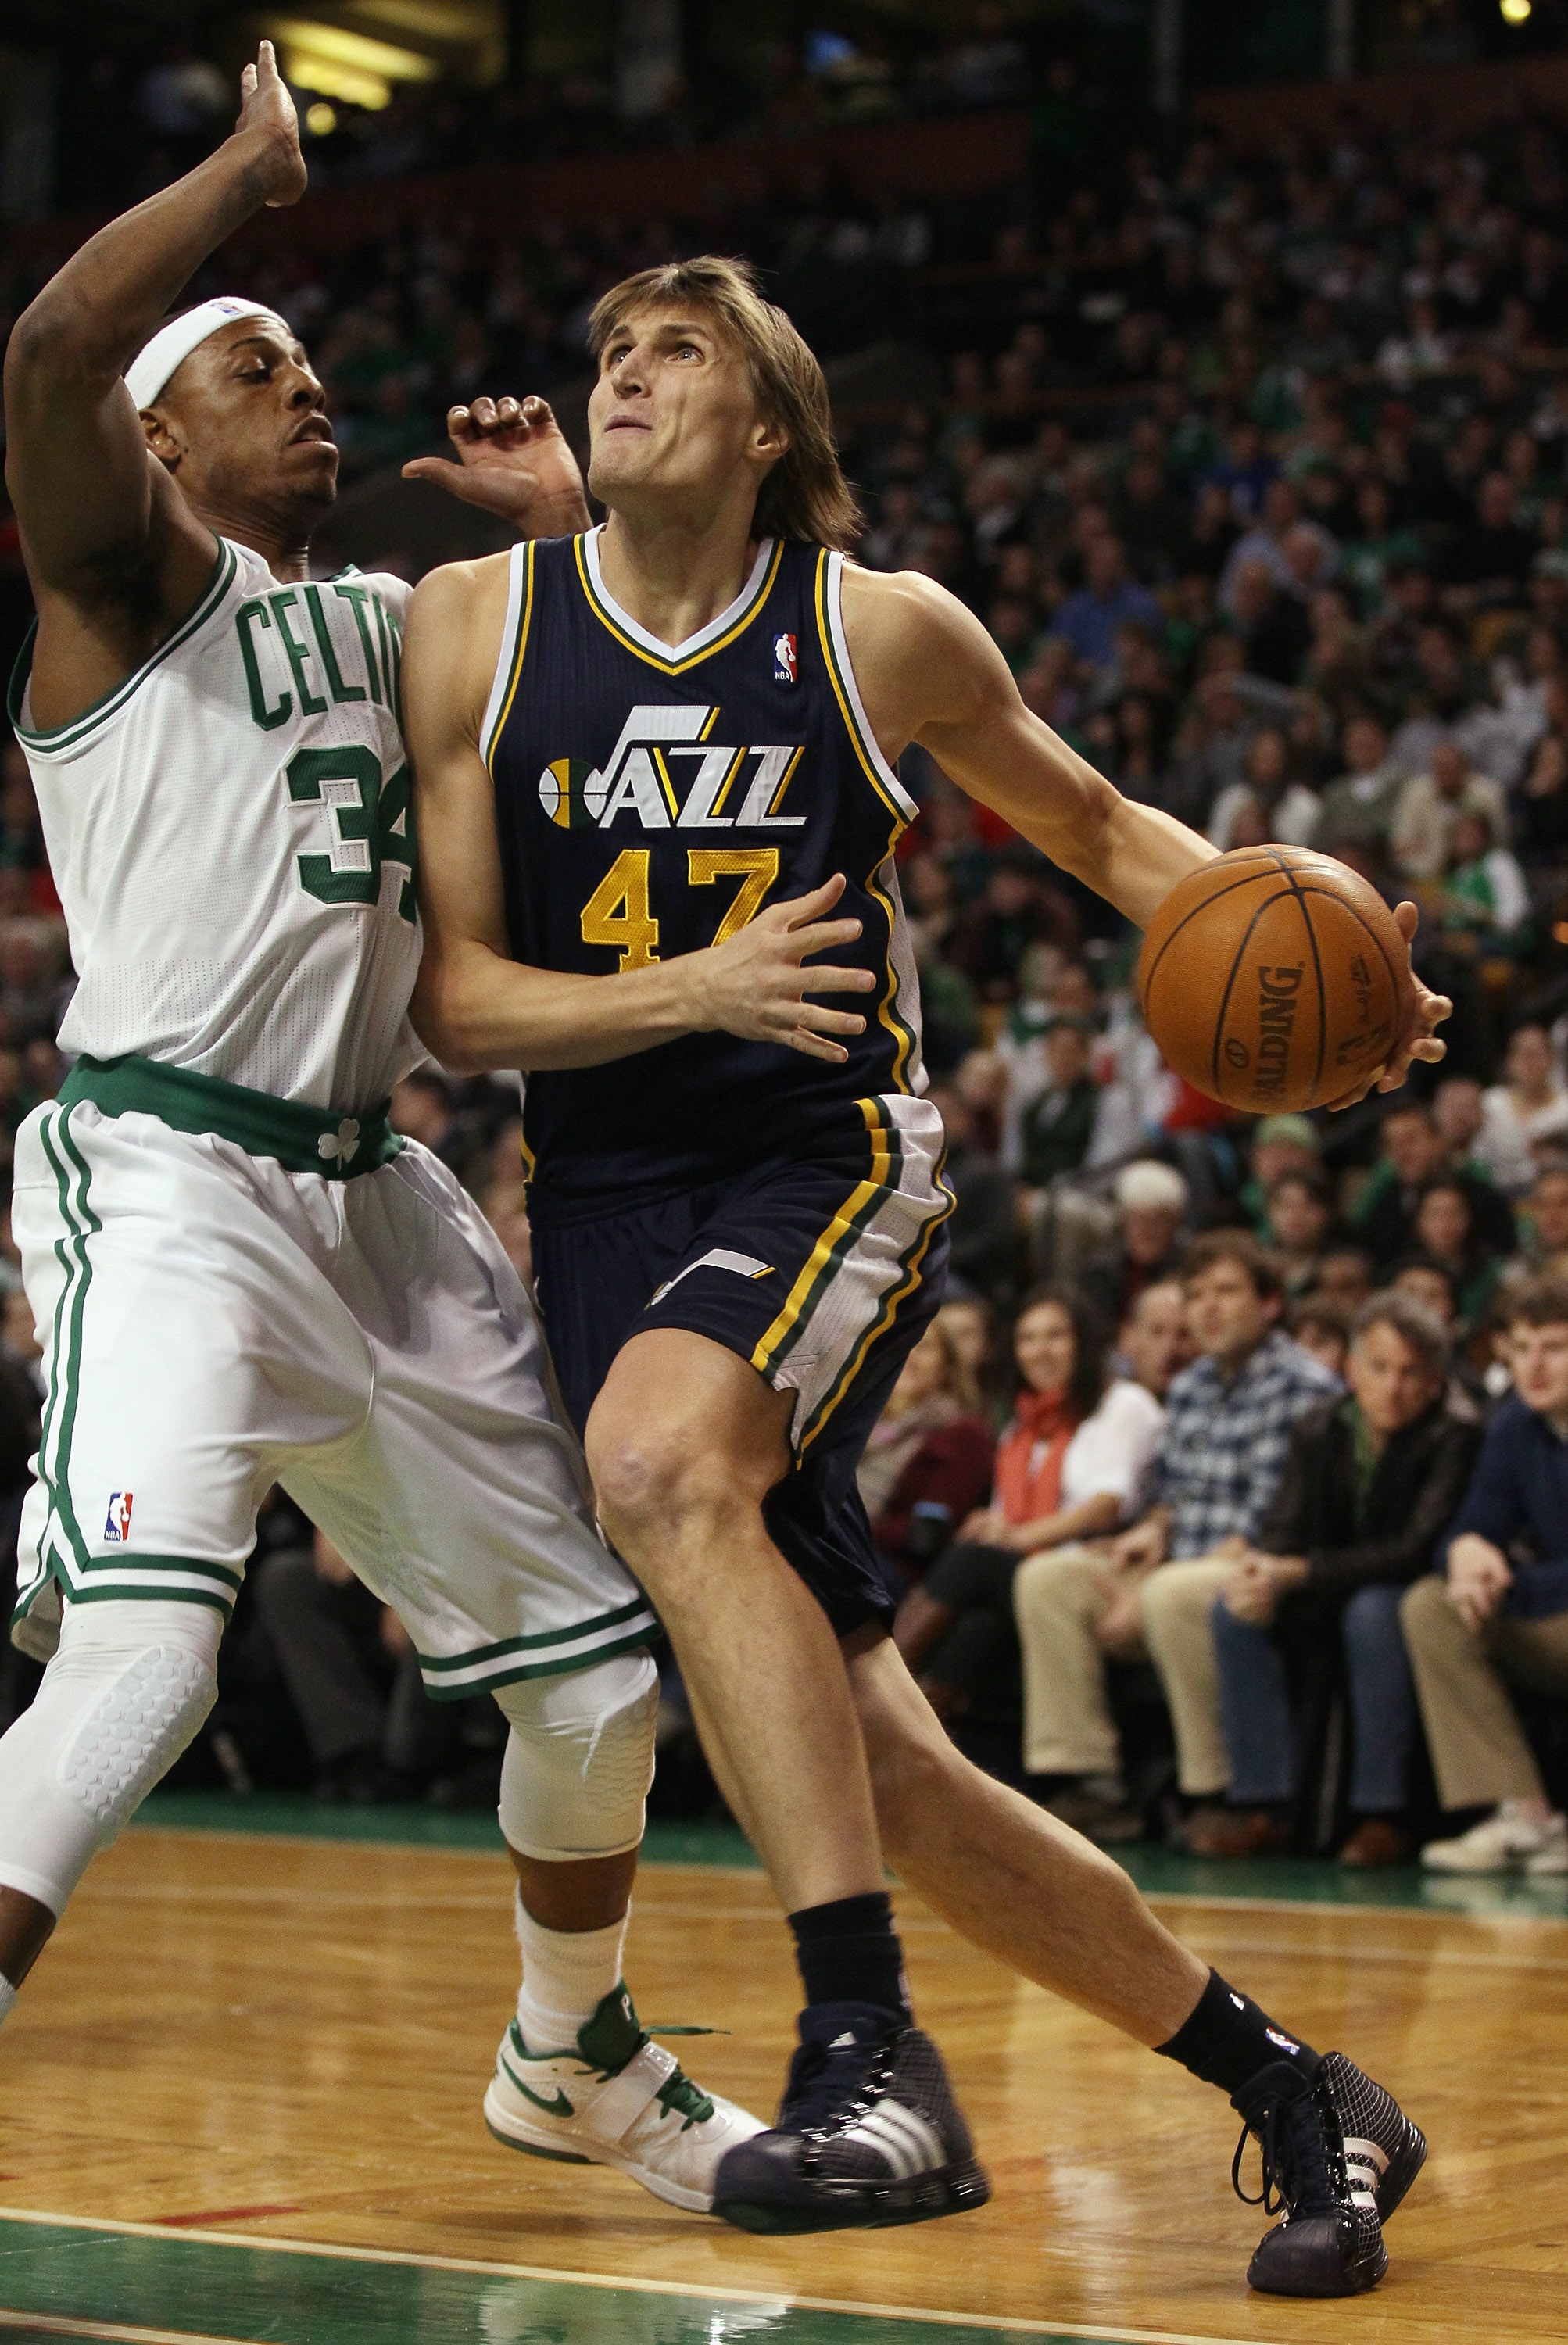 BOSTON, MA - JANUARY 21:  Andrei Kirilenko #47 of the Utah Jazz heads for the basket as Paul Pierce #34 of the Boston Celtics defends on January 21, 2011 at the TD Garden in Boston, Massachusetts.  NOTE TO USER: User expressly acknowledges and agrees that